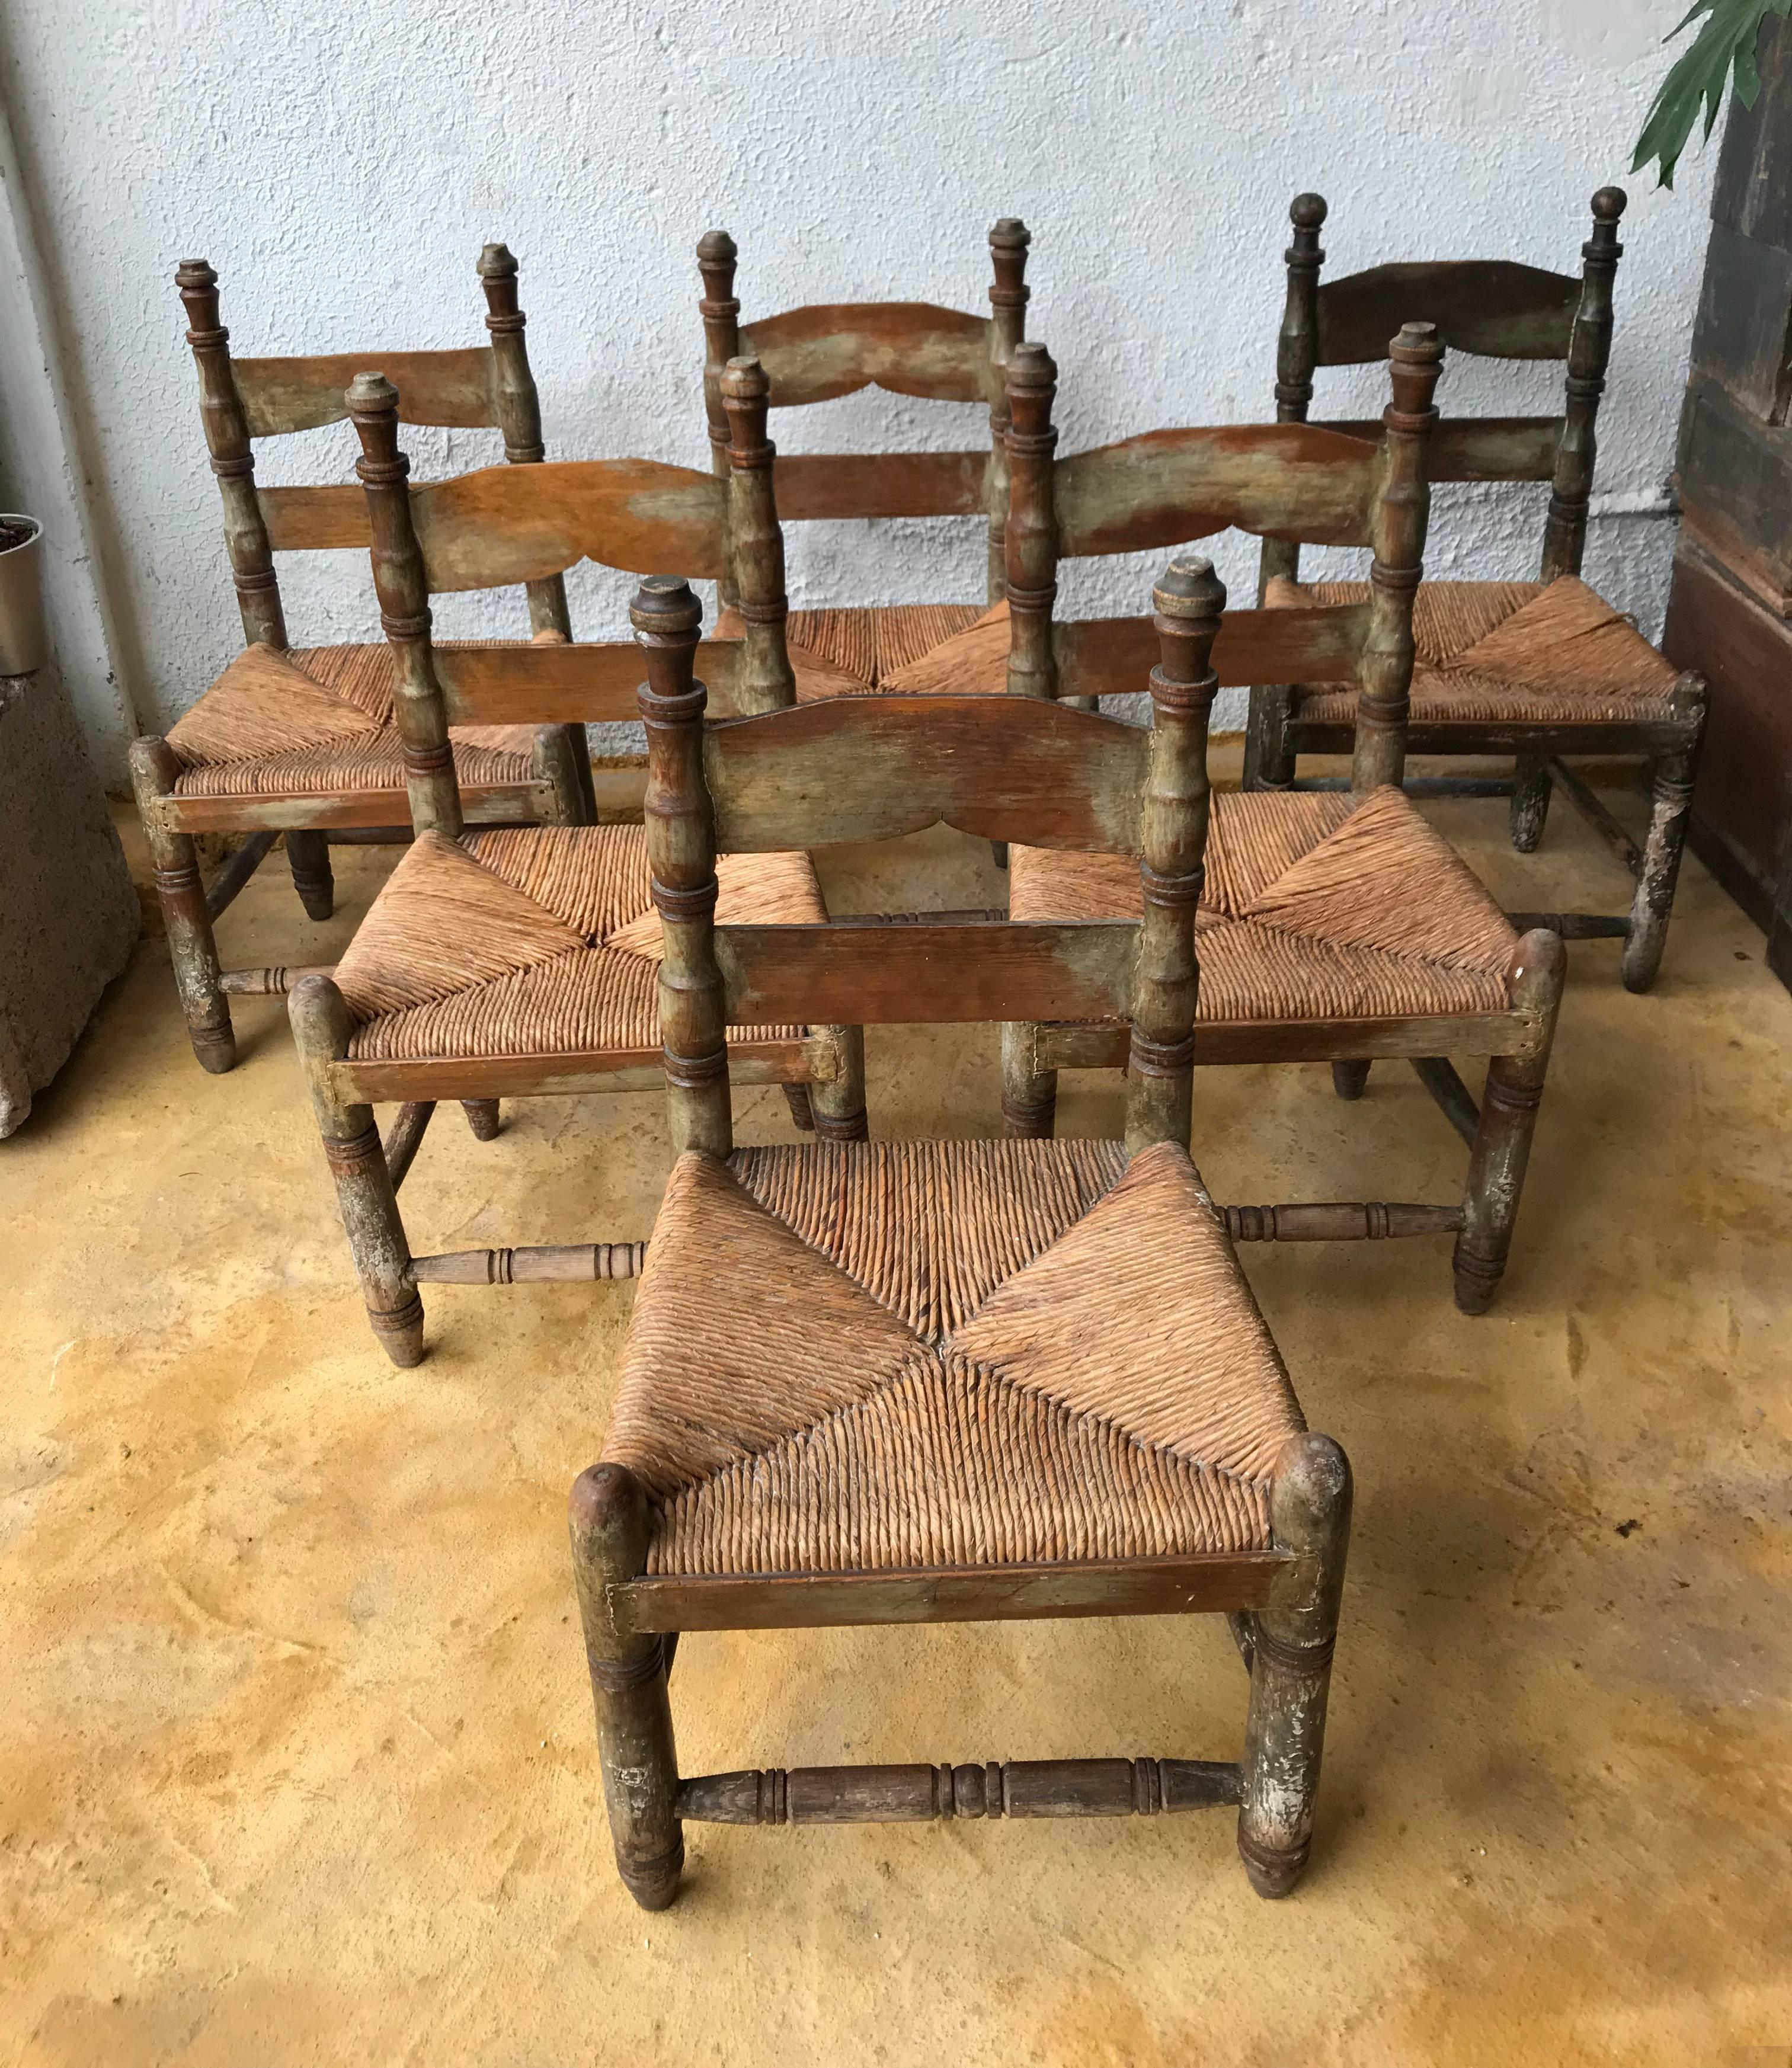 Mexican Set of Six Antique Wood Chairs found in Zacatecas, México, circa 1900